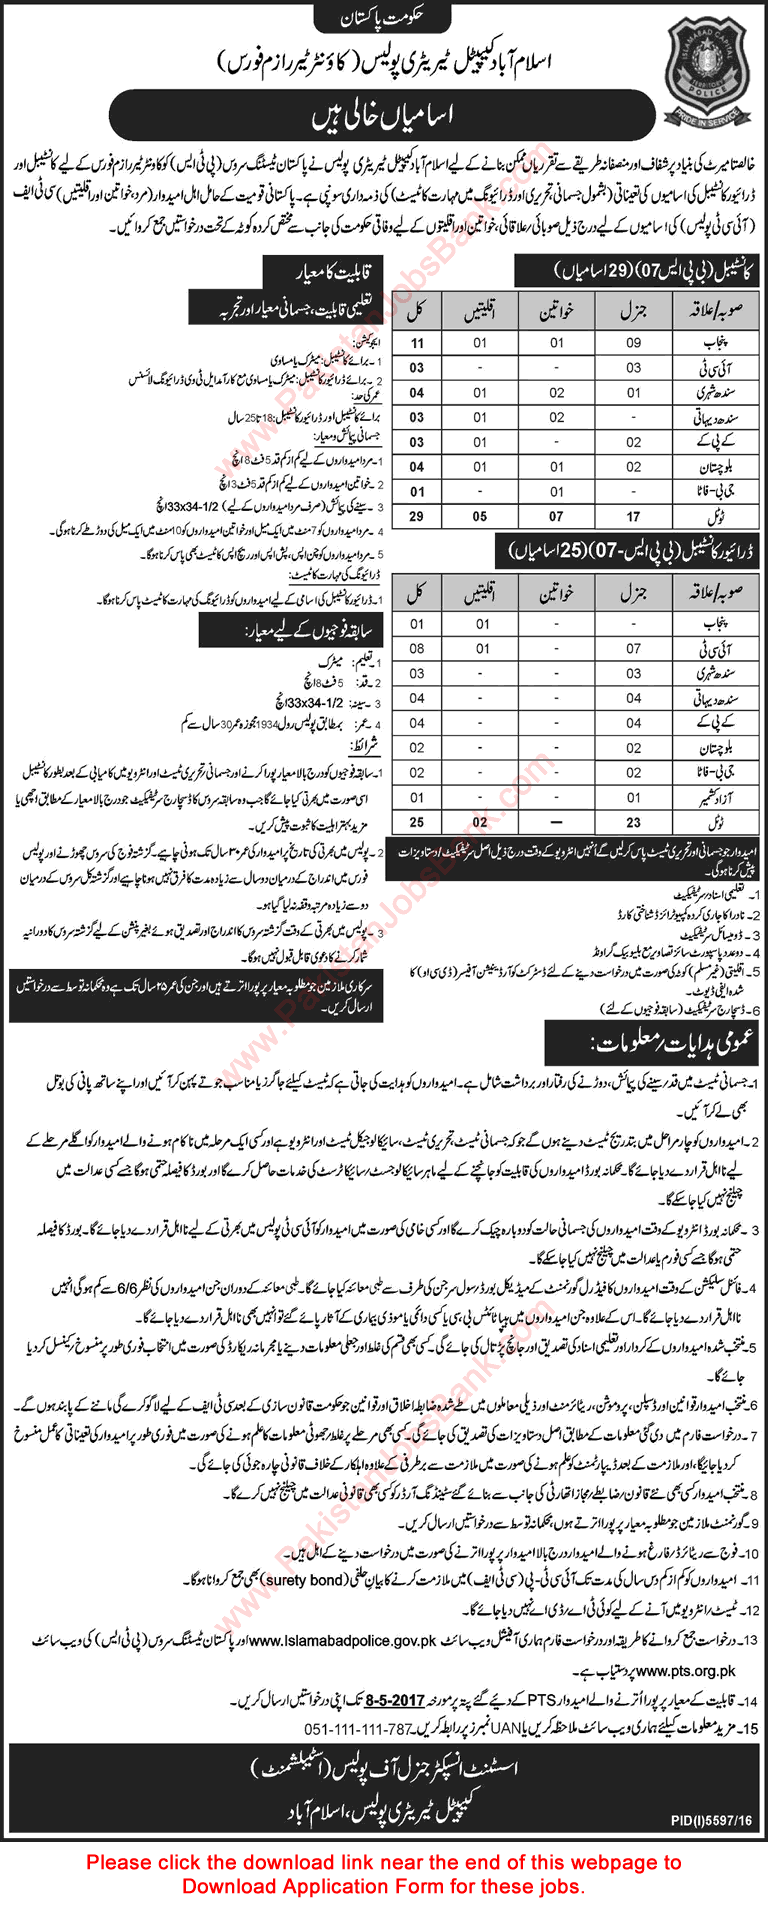 Islamabad Police Jobs April 2017 PTS Application Form Constables & Drivers Counter Terrorism Force Latest